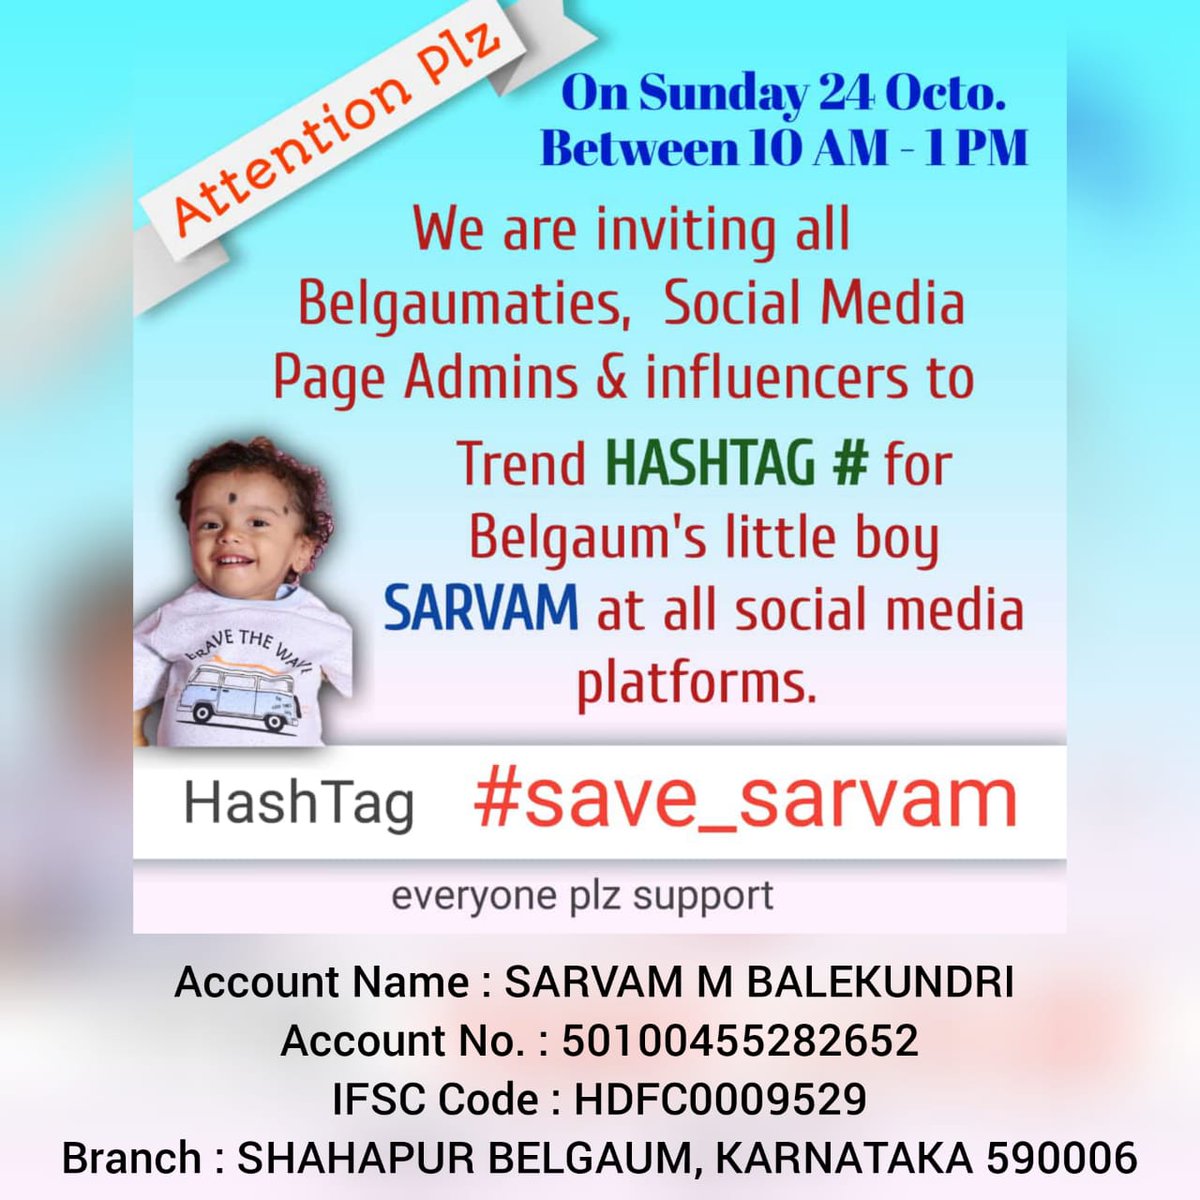 #save_sarvam For the last 15 months SARVAM is fighting with (SMA-1) a rare disease. To recover from this, need to inject Zolgensma in four months at a cost of Rs 16 crore which want to raise from Crowd funding. @akshaykumar @RNTata2000 @SonuSood @imVkohli @flyingbeast320